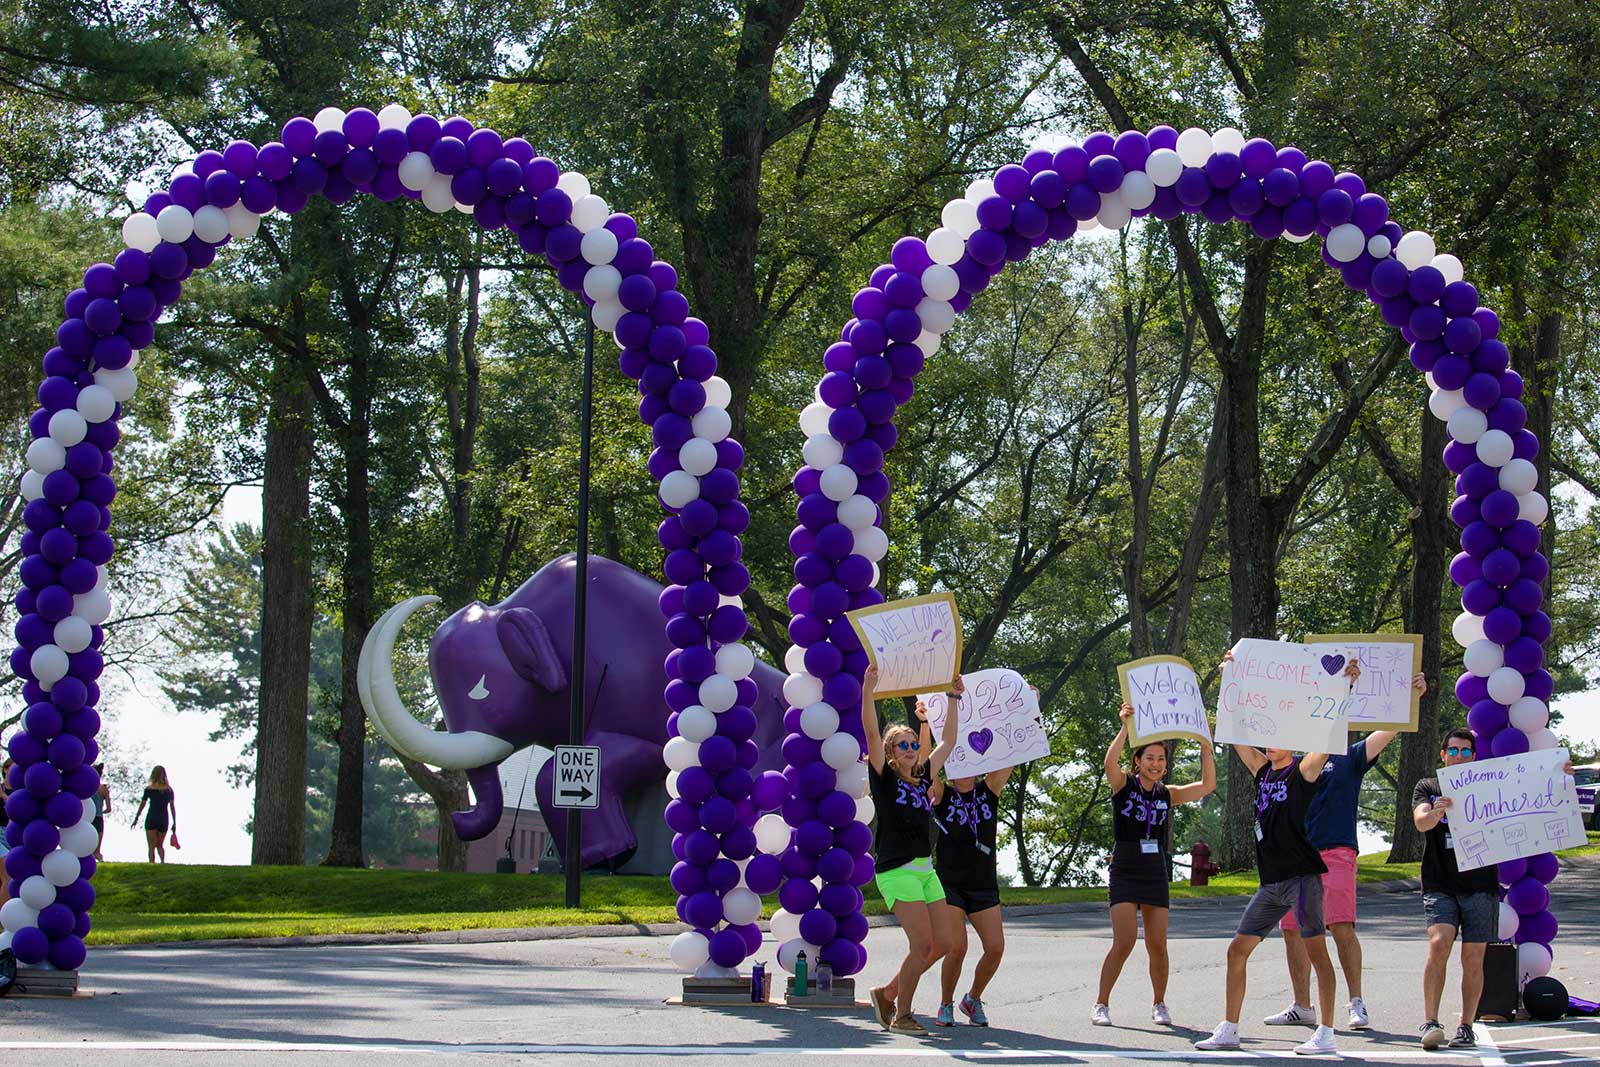 Cars entering the campus were greeted by this cheer squad and the Mammoth mascot.